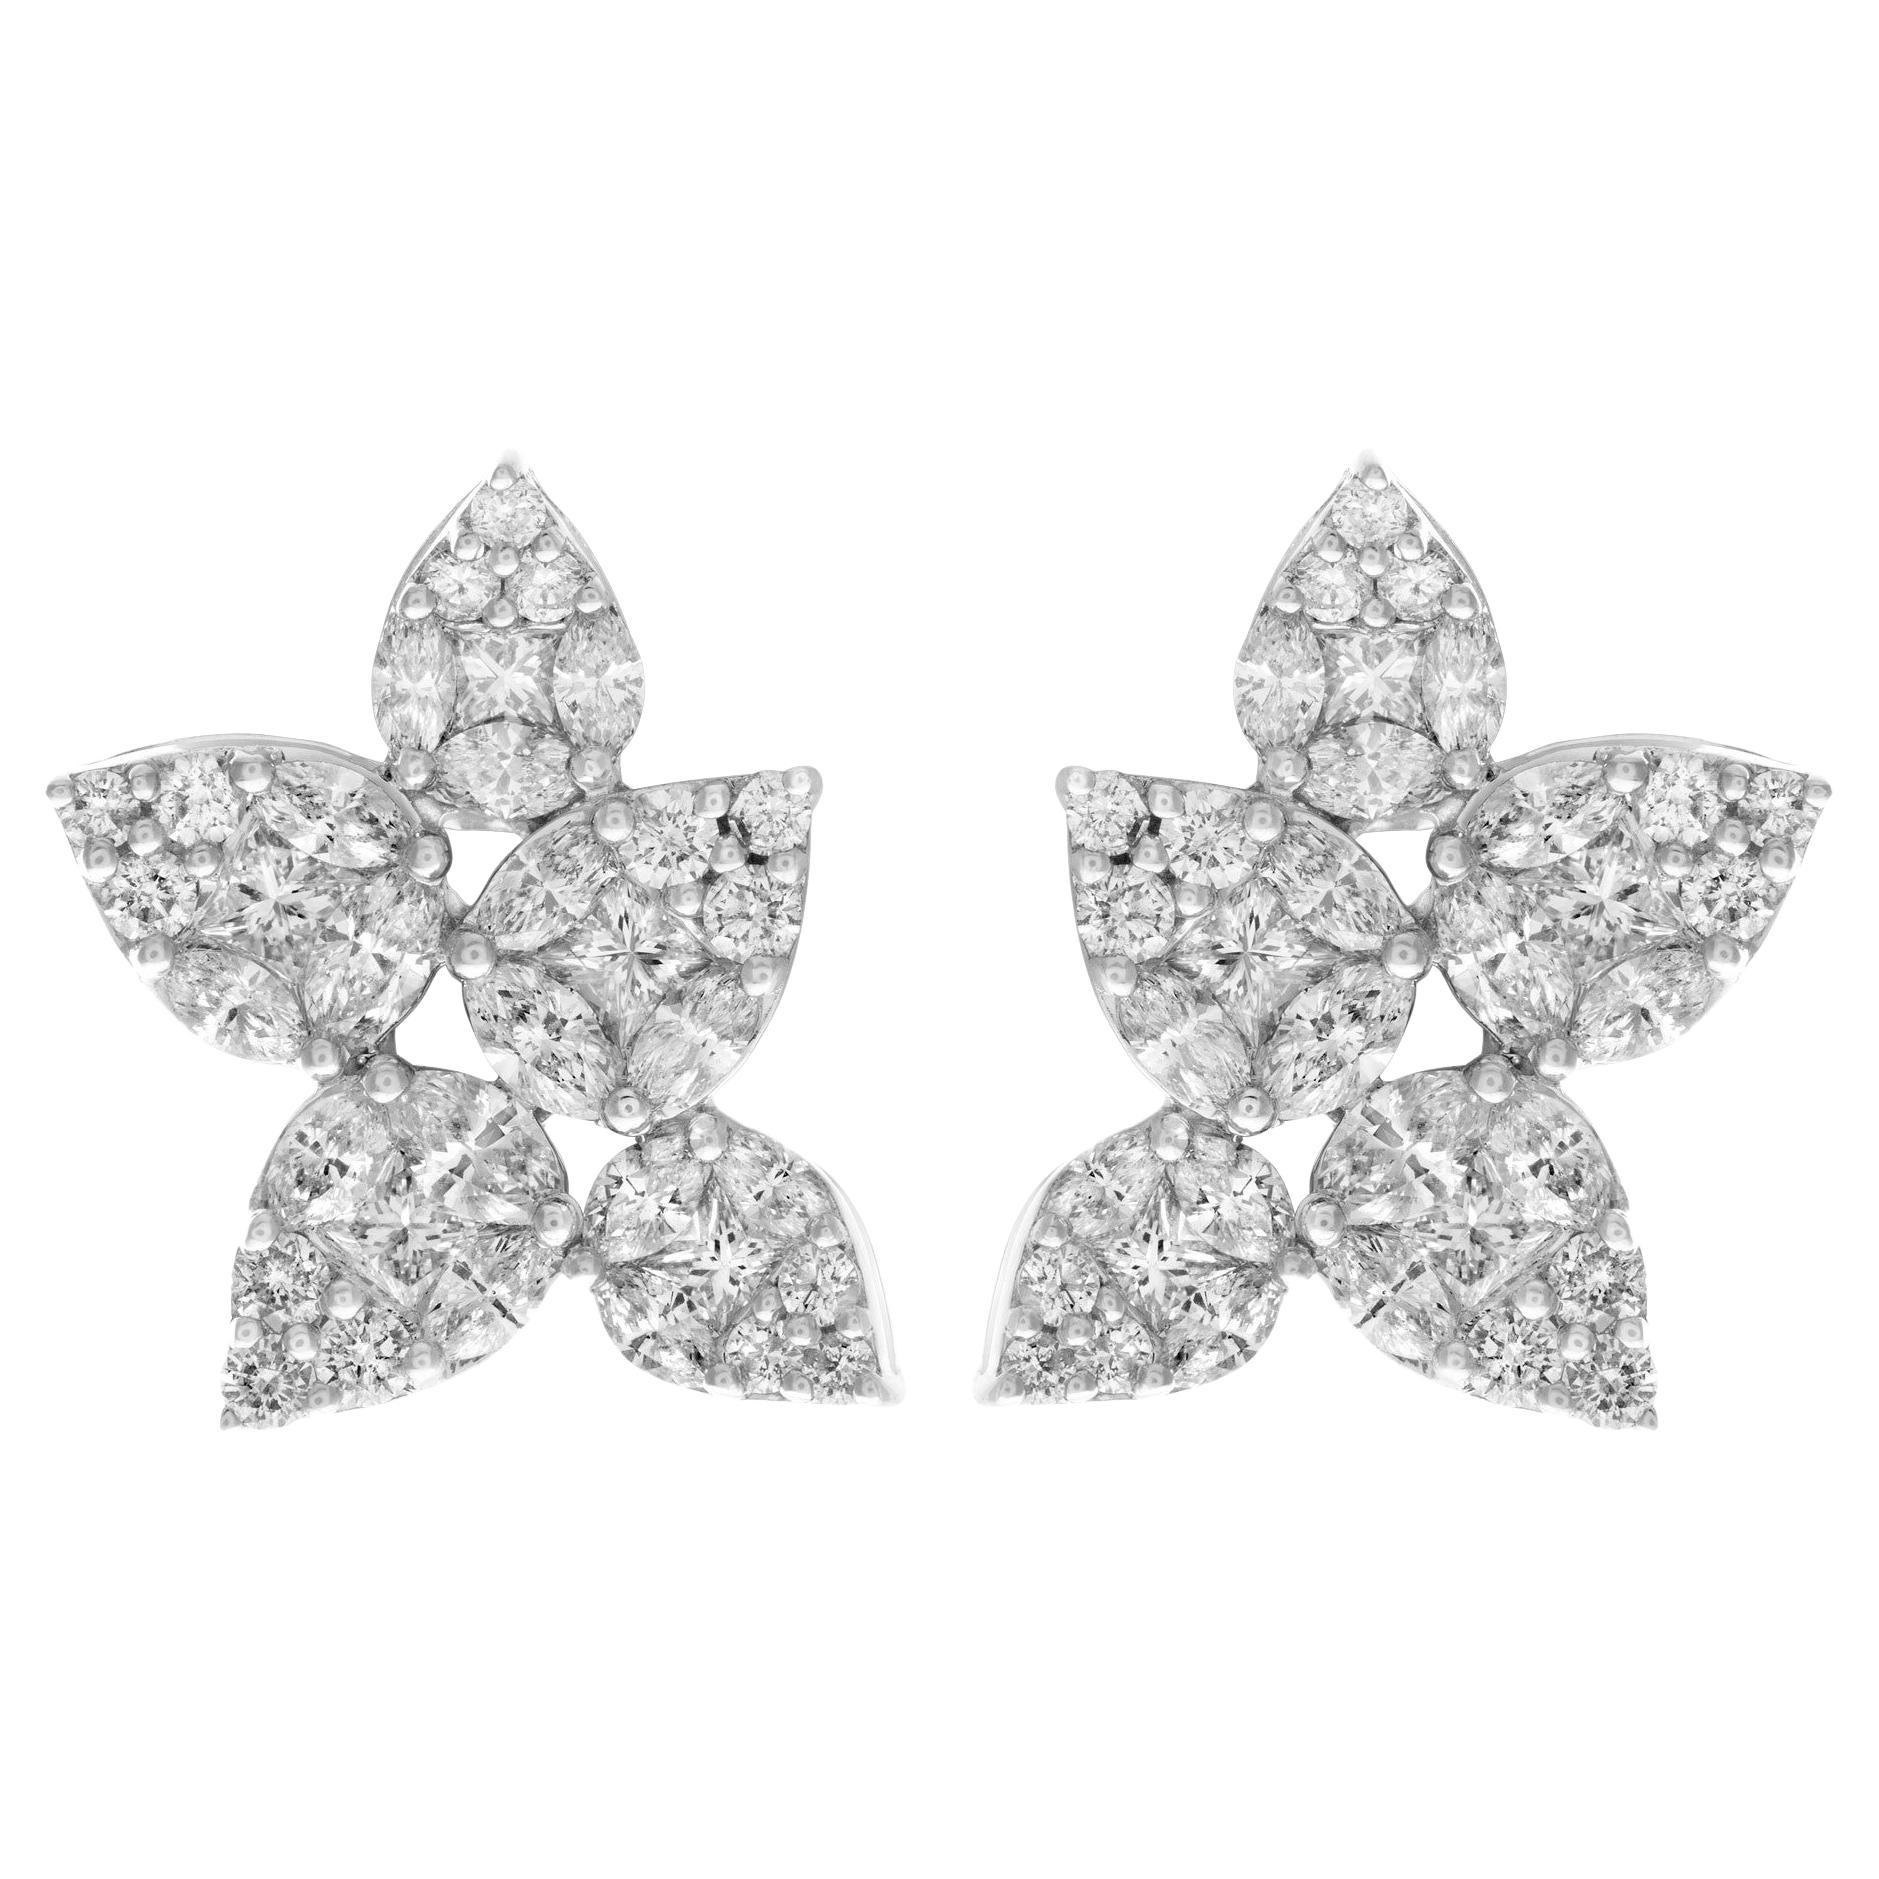 Invisible Set Princess & Round Cut Diamonds Flower Earrings in 18k White Gold